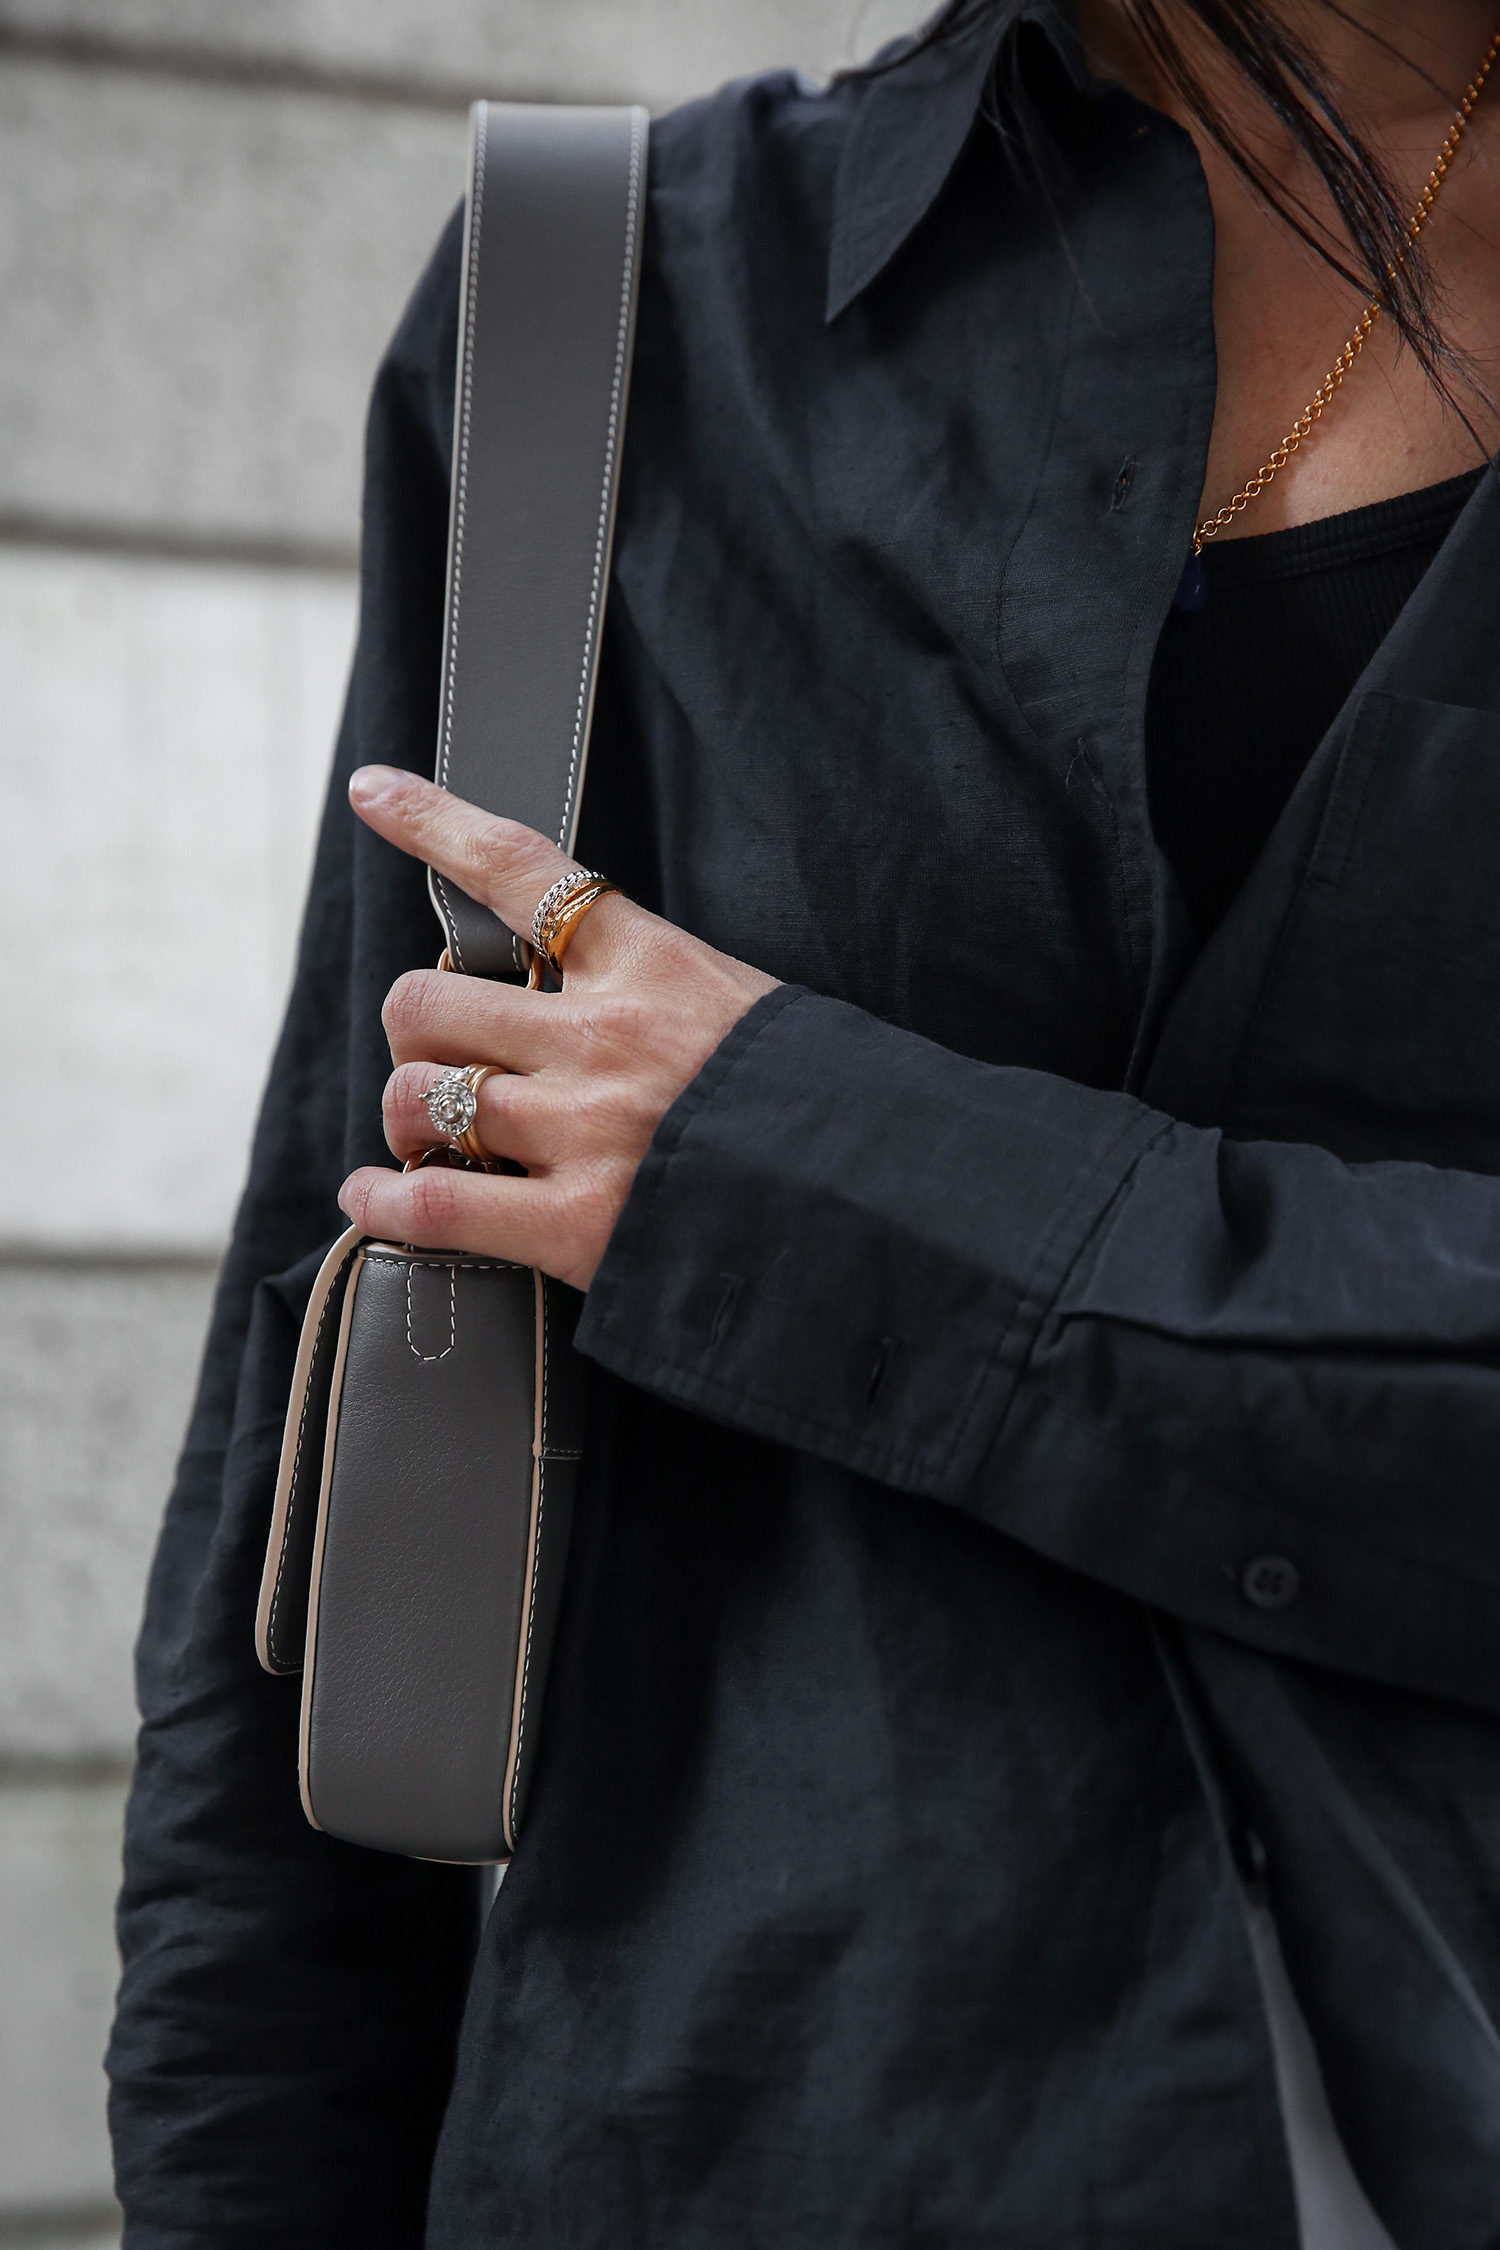 A Look at the Strathberry Melville Baguette - PurseBlog